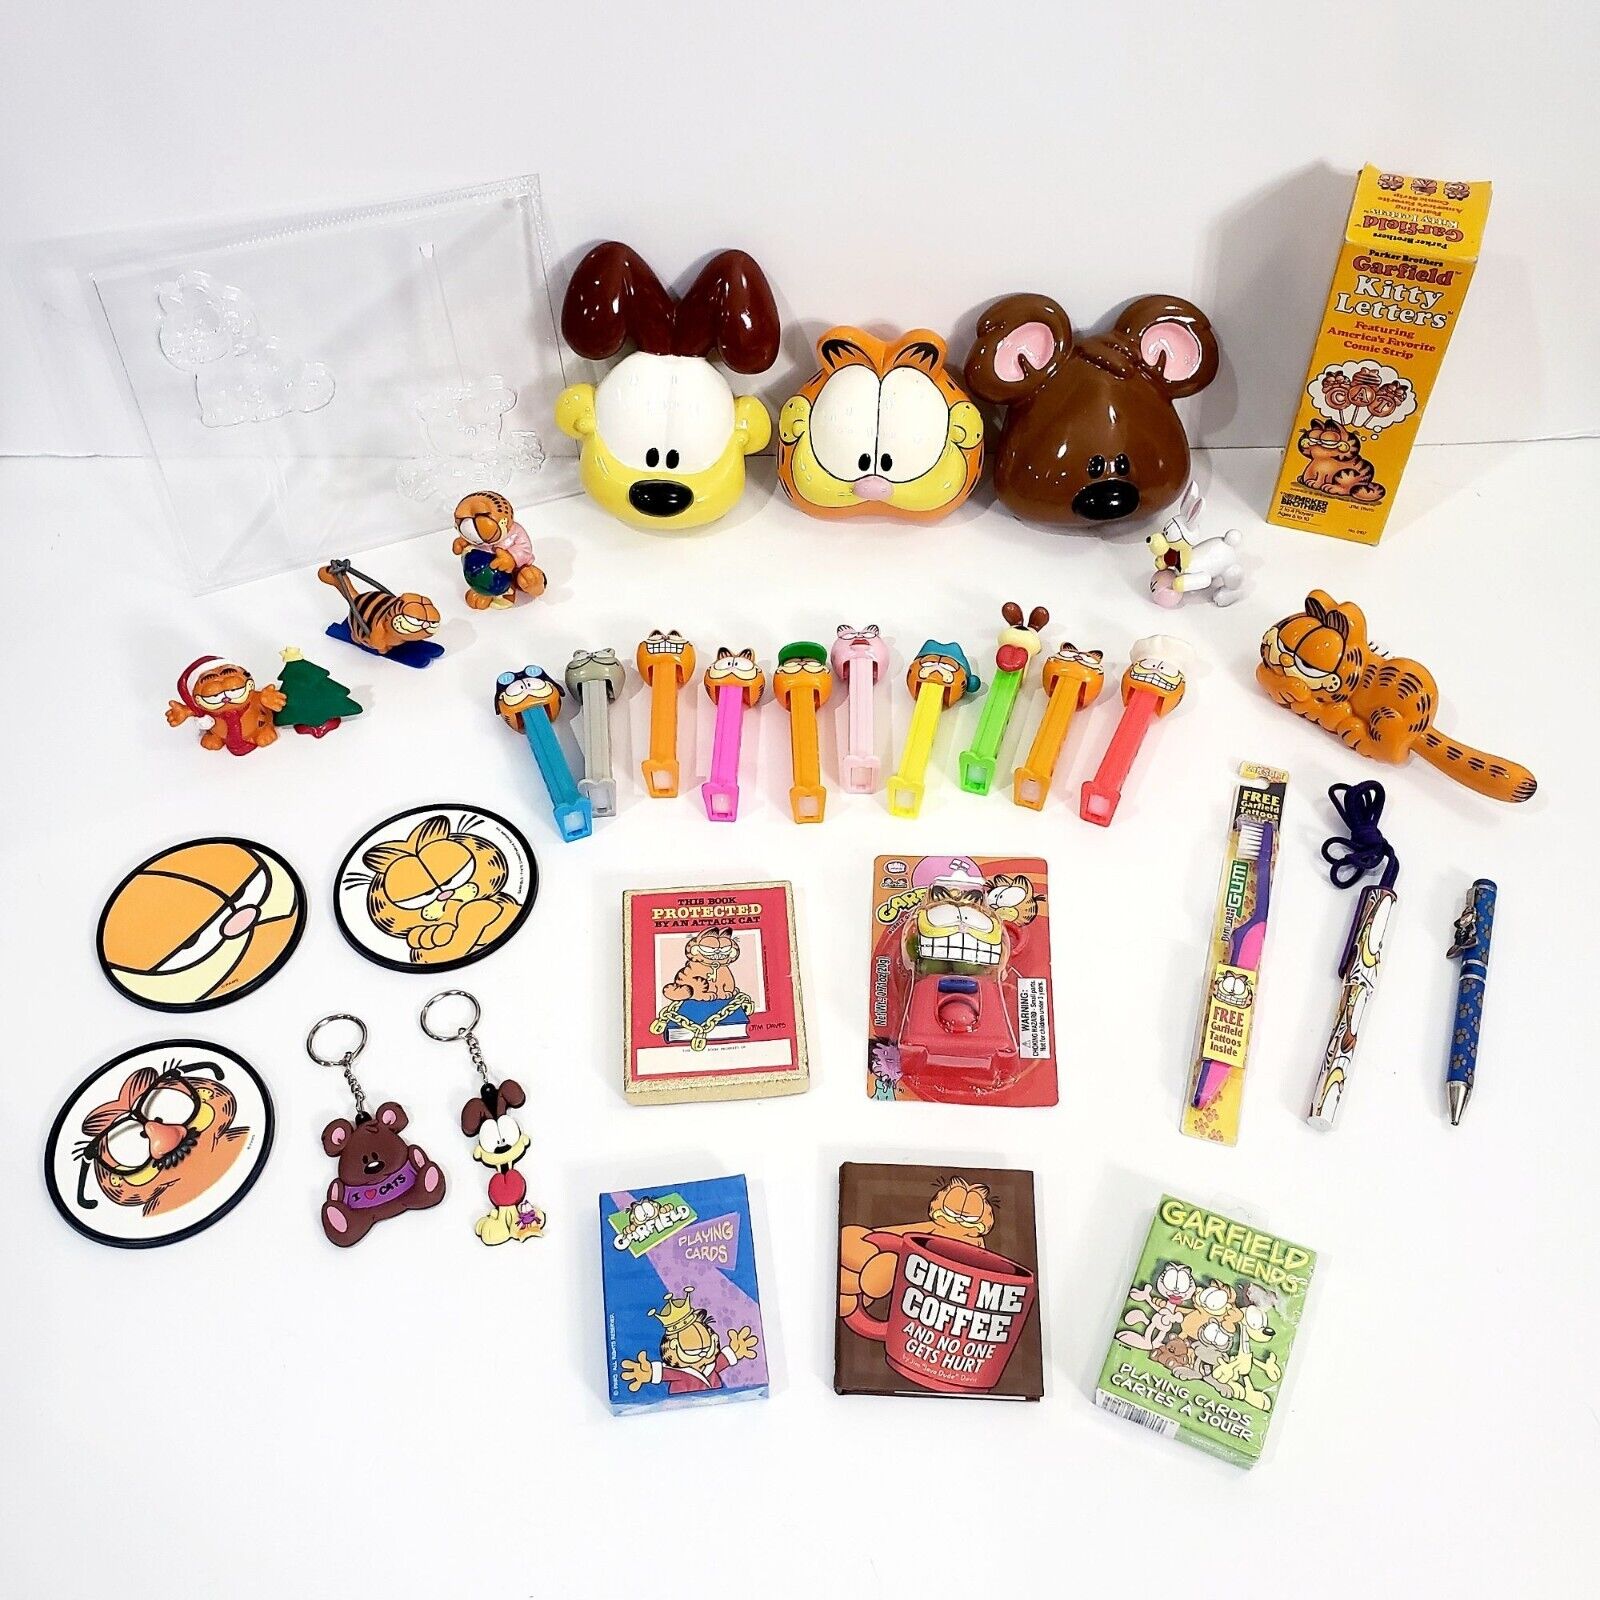 Vintage Garfield Collectable Lot: Coasters Pens Keychains Cards Stickers & More